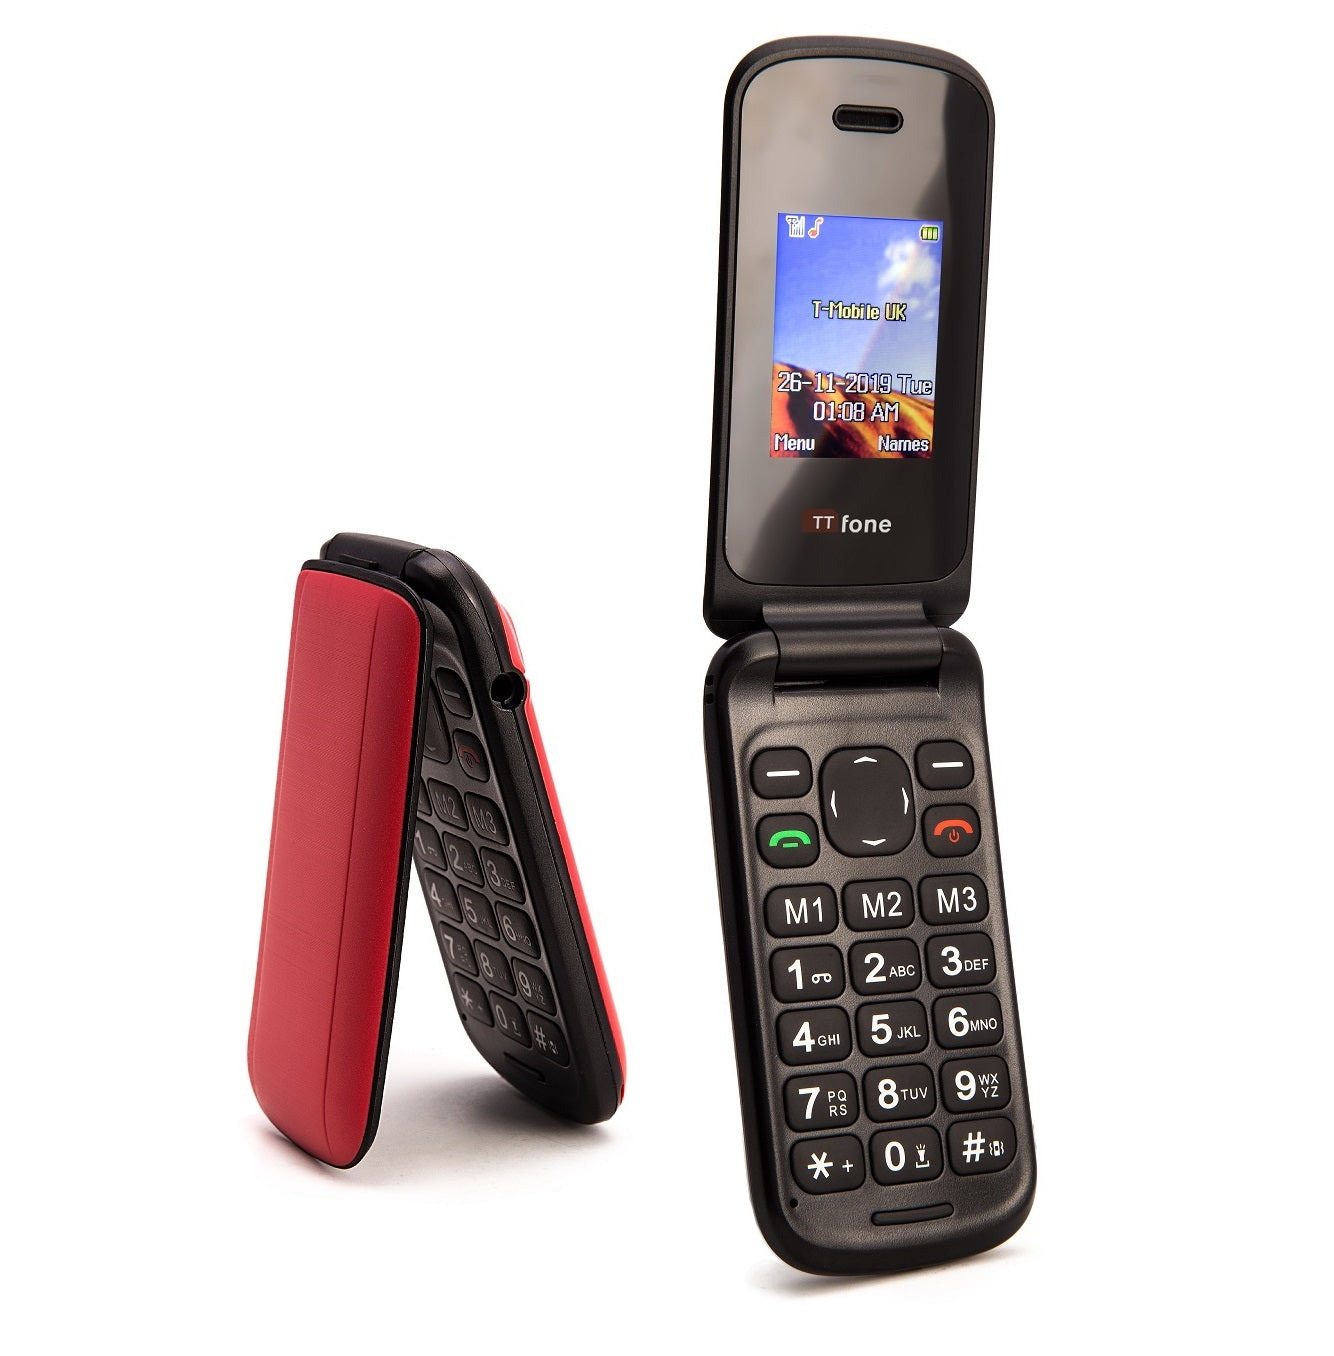 TTfone TT140 Red - Warehouse Deals Flip Folding Phone with USB Cable, Giff Gaff Pay As You Go